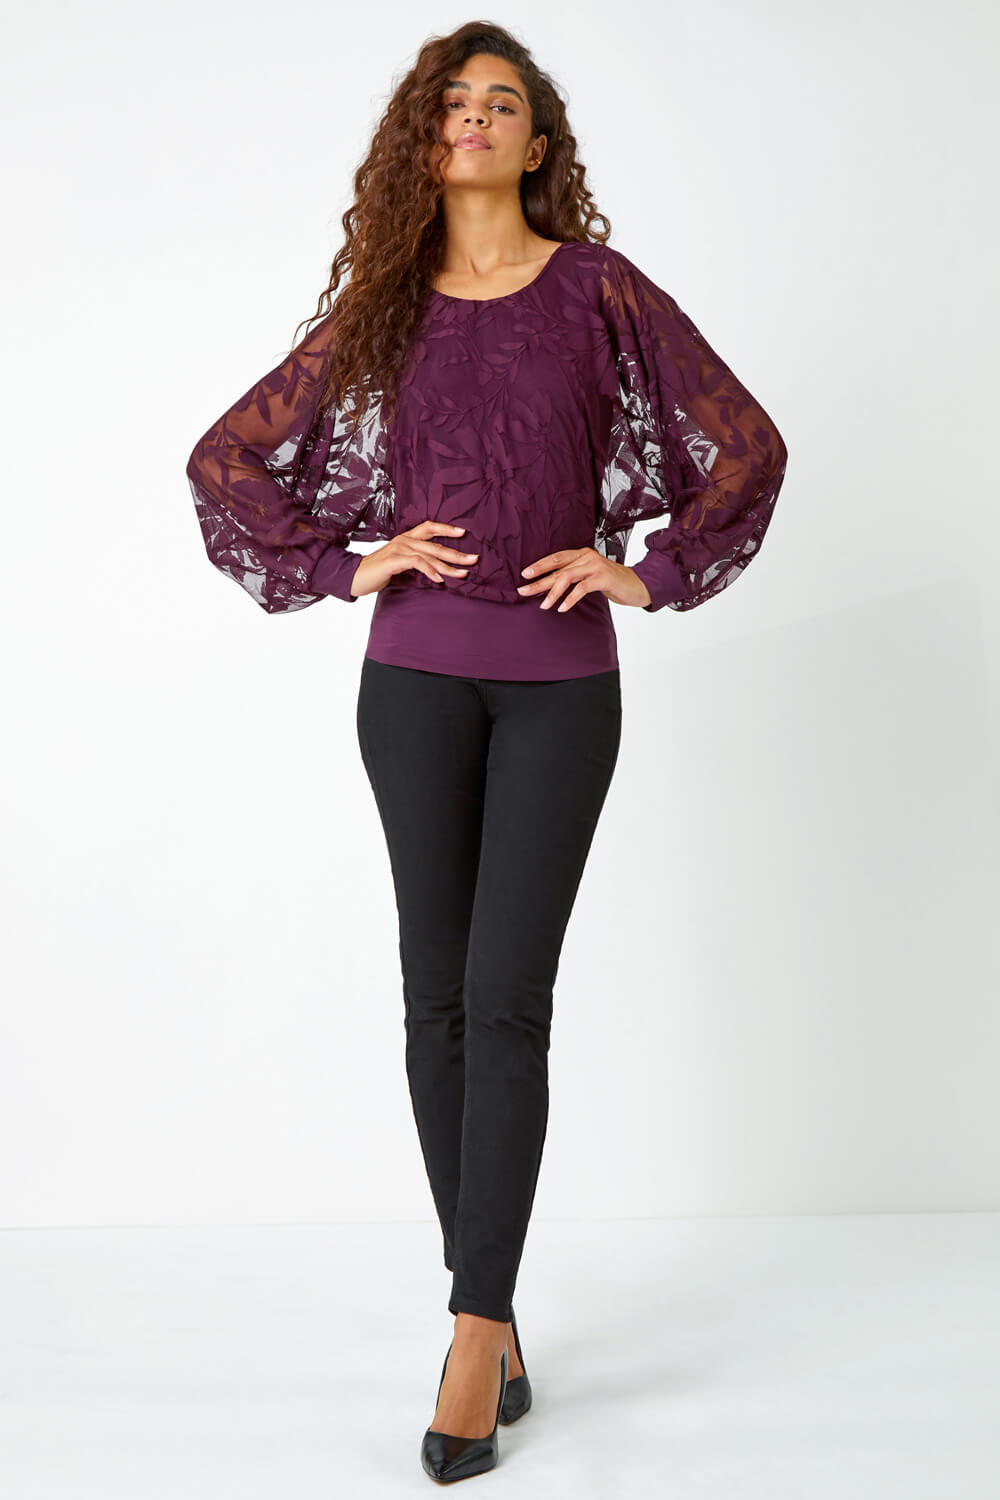 Plum Textured Floral Blouson Stretch Top, Image 2 of 5